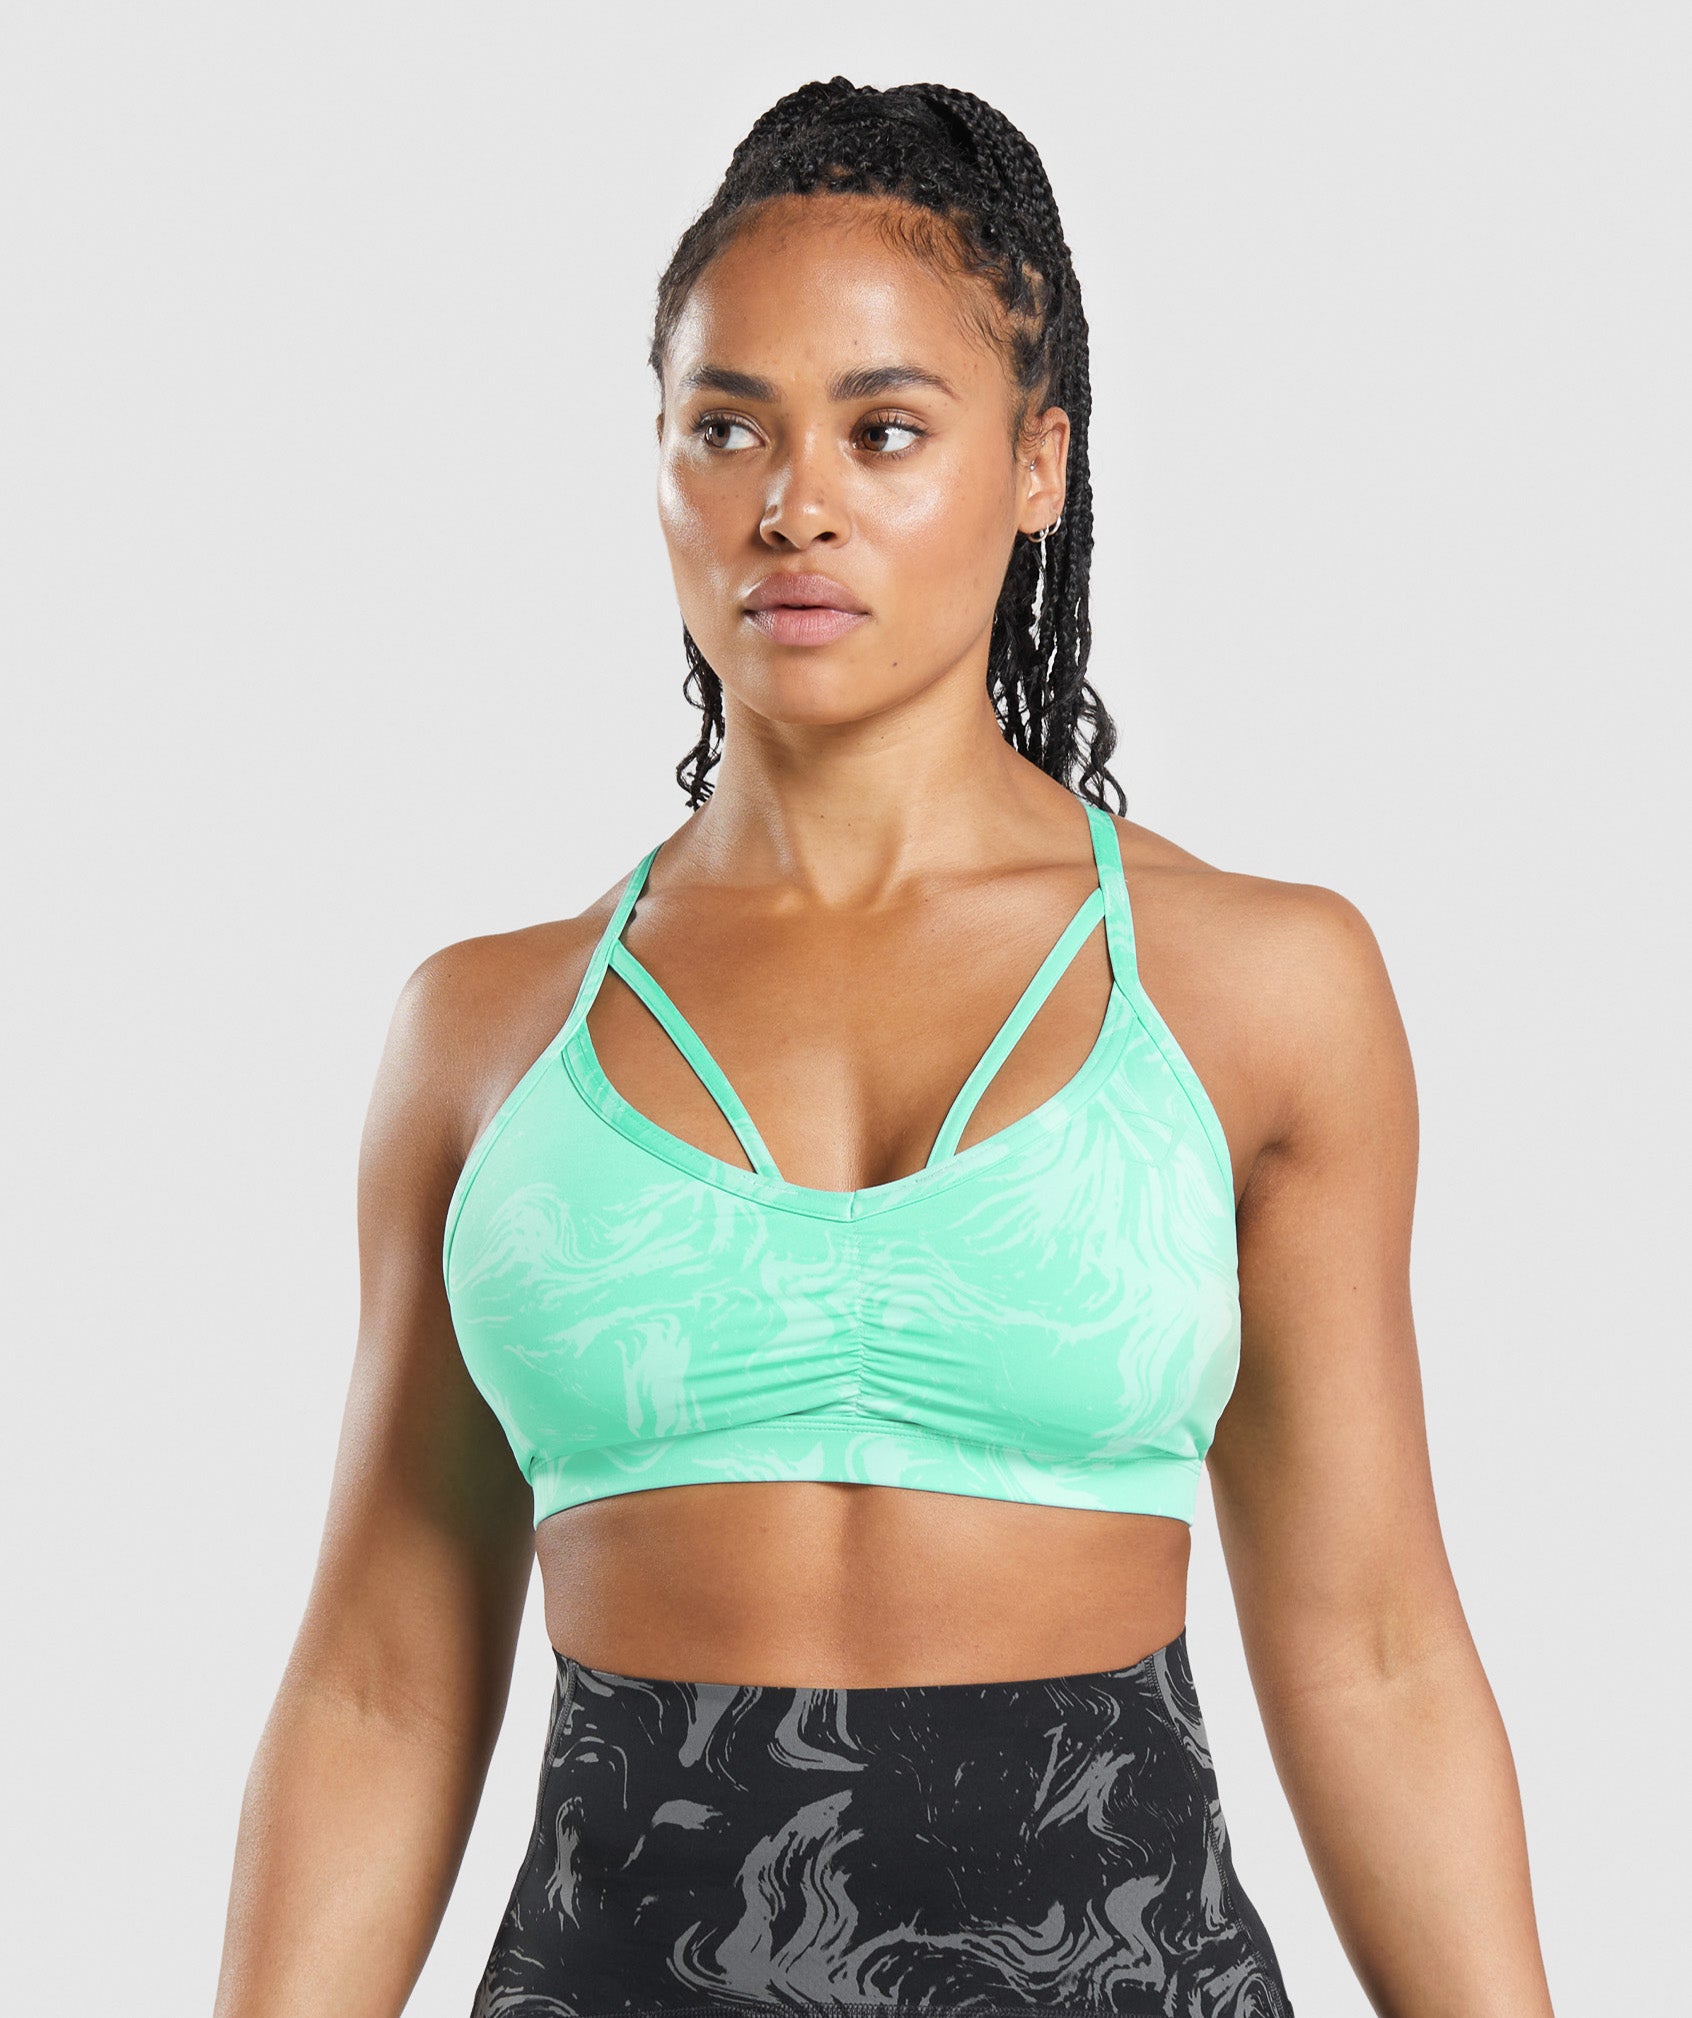  Lfzhjzc Sports Bras for Women Plus Size, High Impact Shockproof  Sports Bras for Women, Running Gym Training Bra (Color : Green, Size :  Medium) : Clothing, Shoes & Jewelry